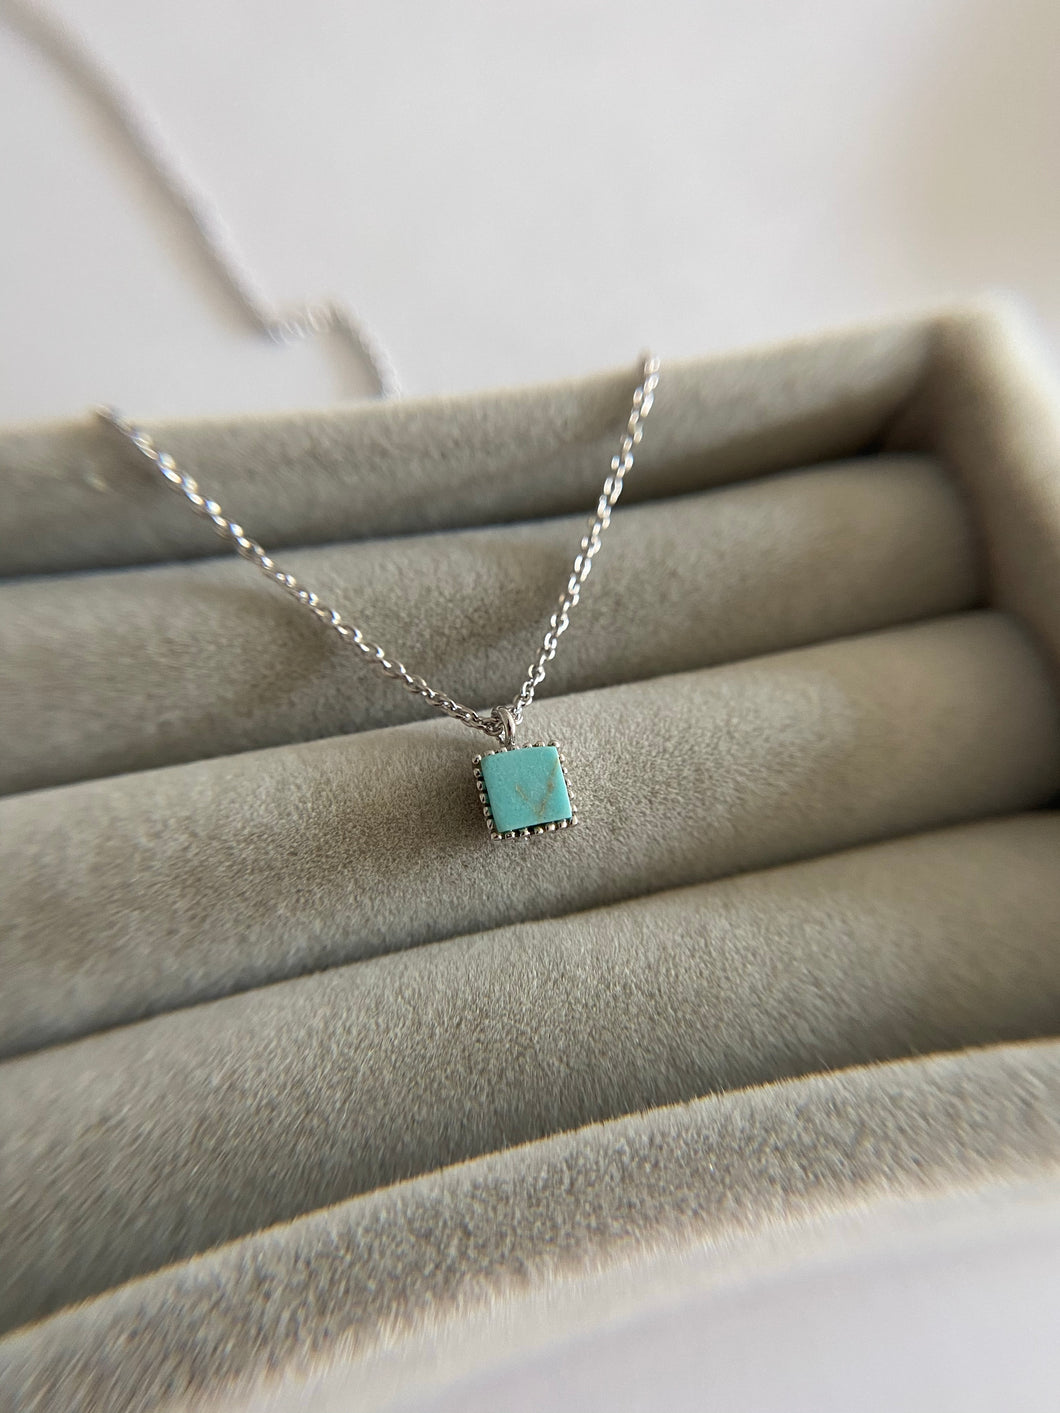 Silver Necklace with Square Turquoise Pendant 20 Inches / 50.8 cm